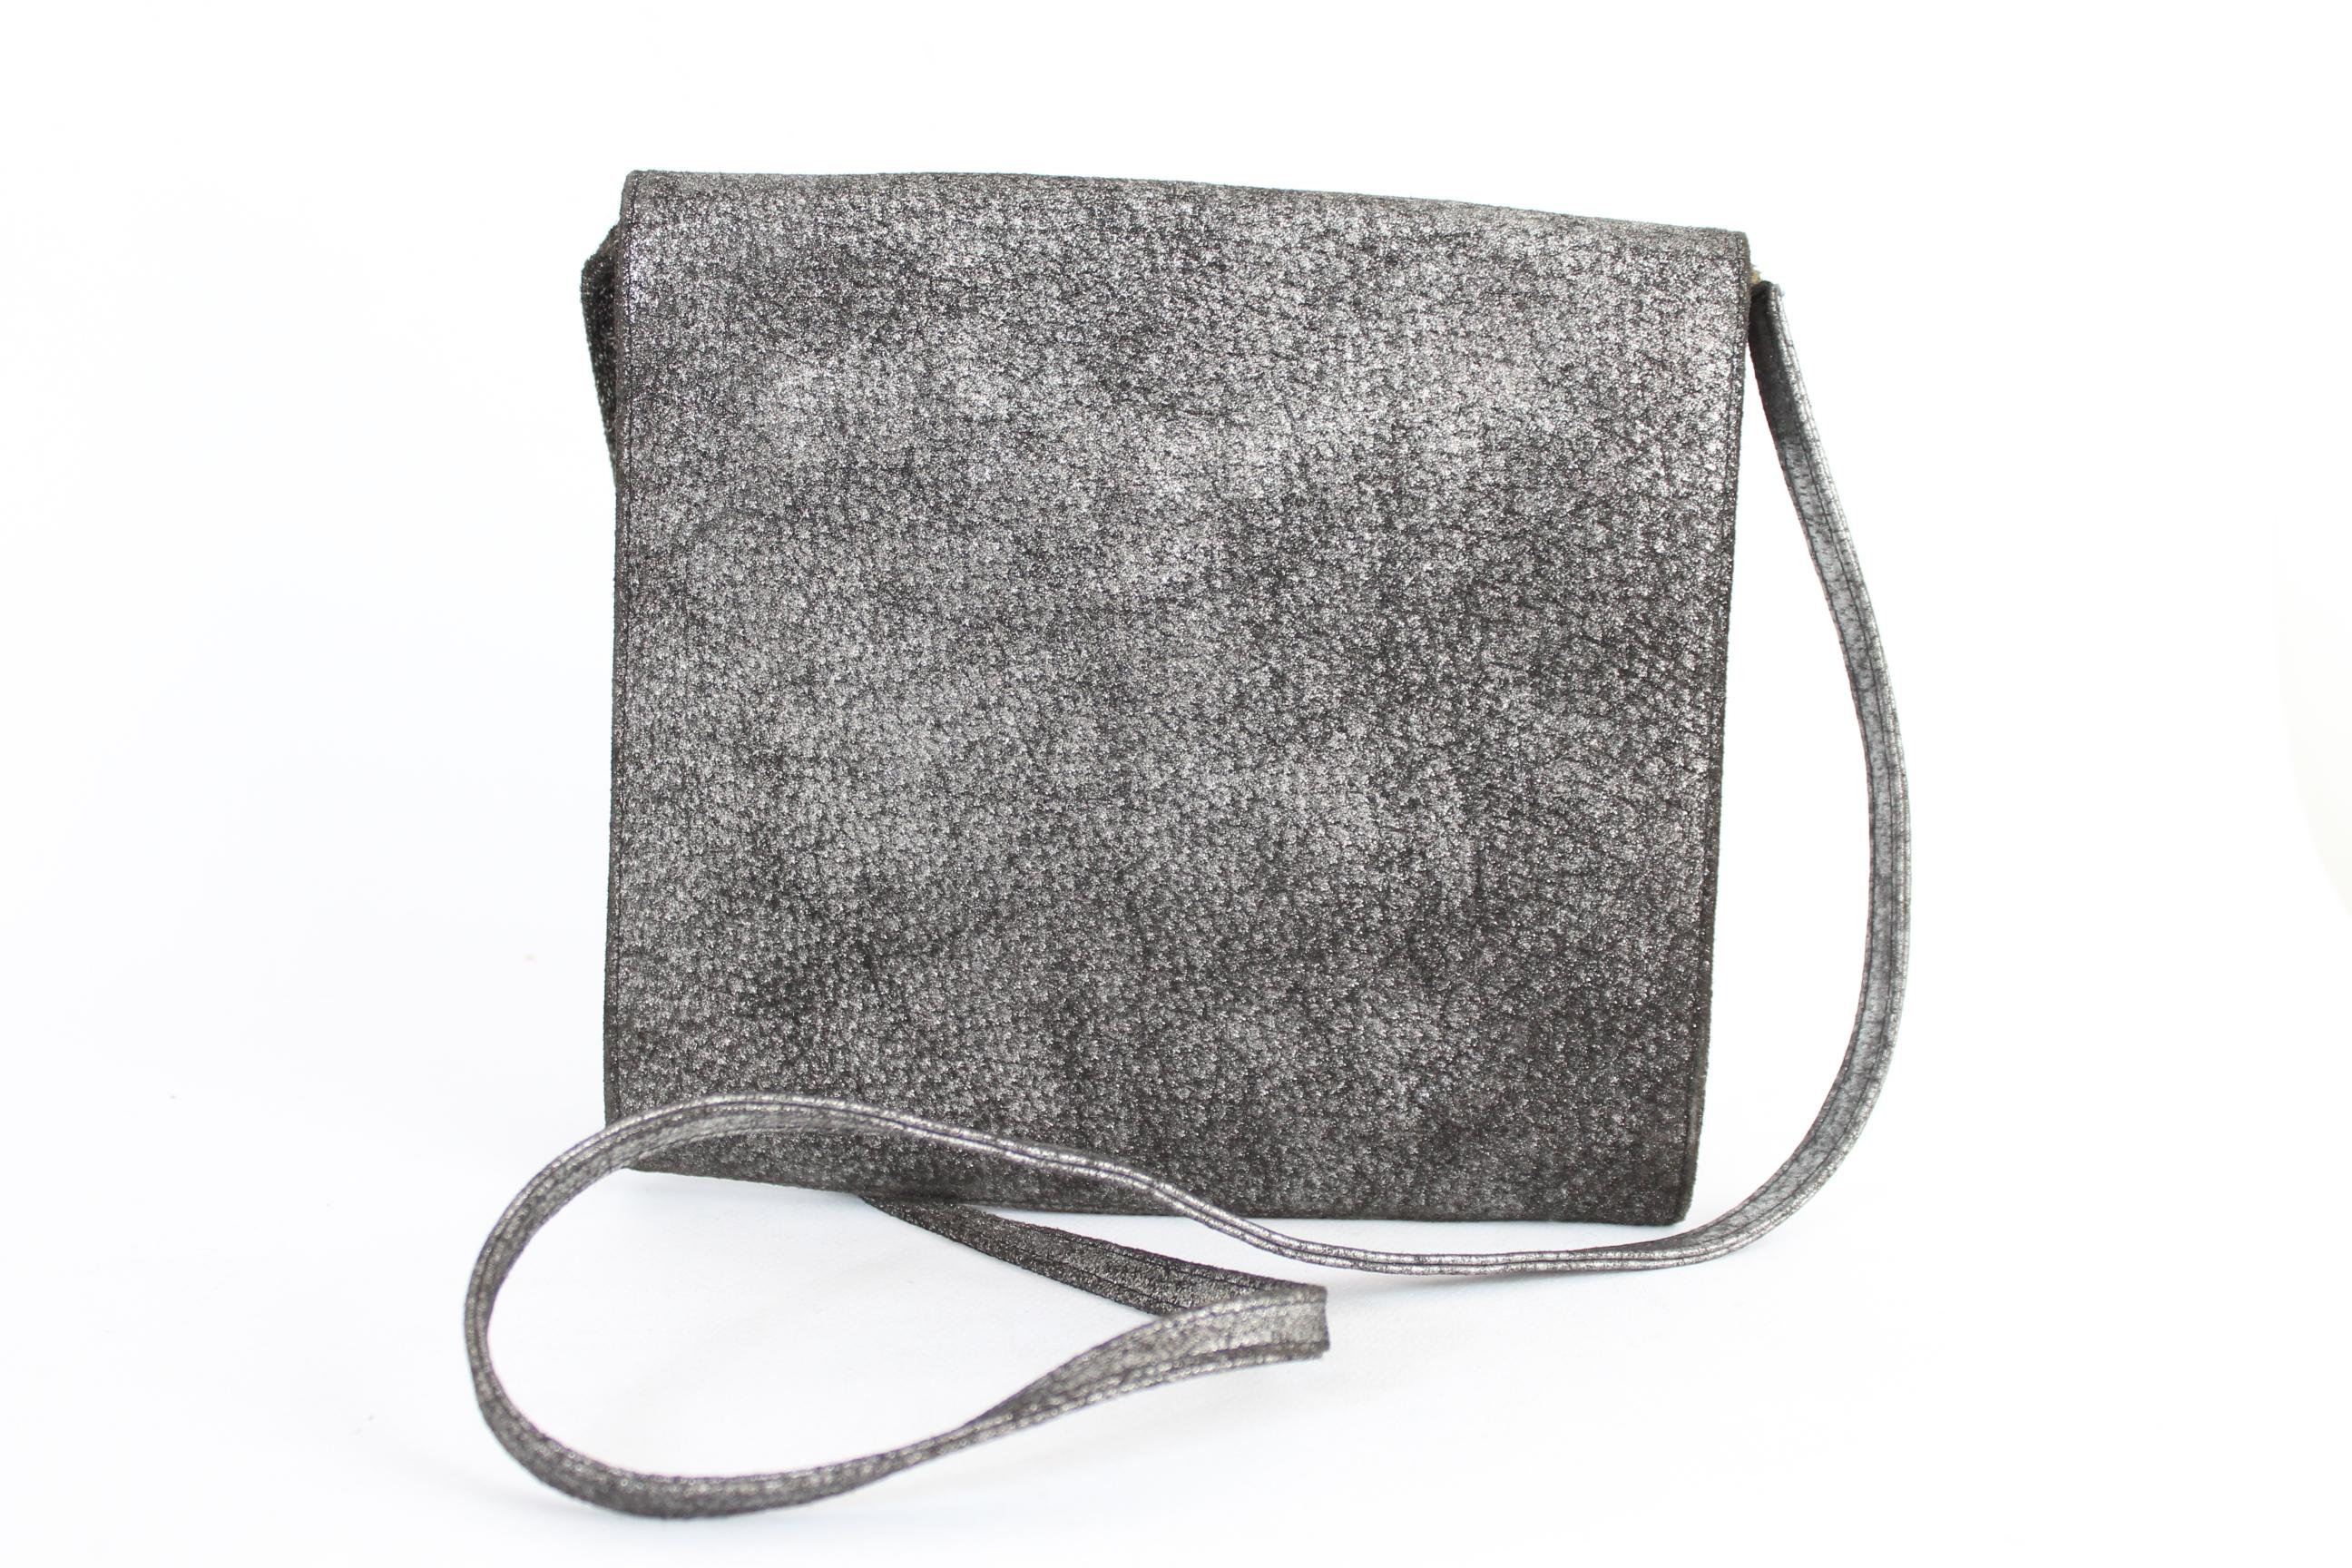 Krizia Silver Leather Evening Shoulder Bag 1980s In Excellent Condition For Sale In Brindisi, Bt